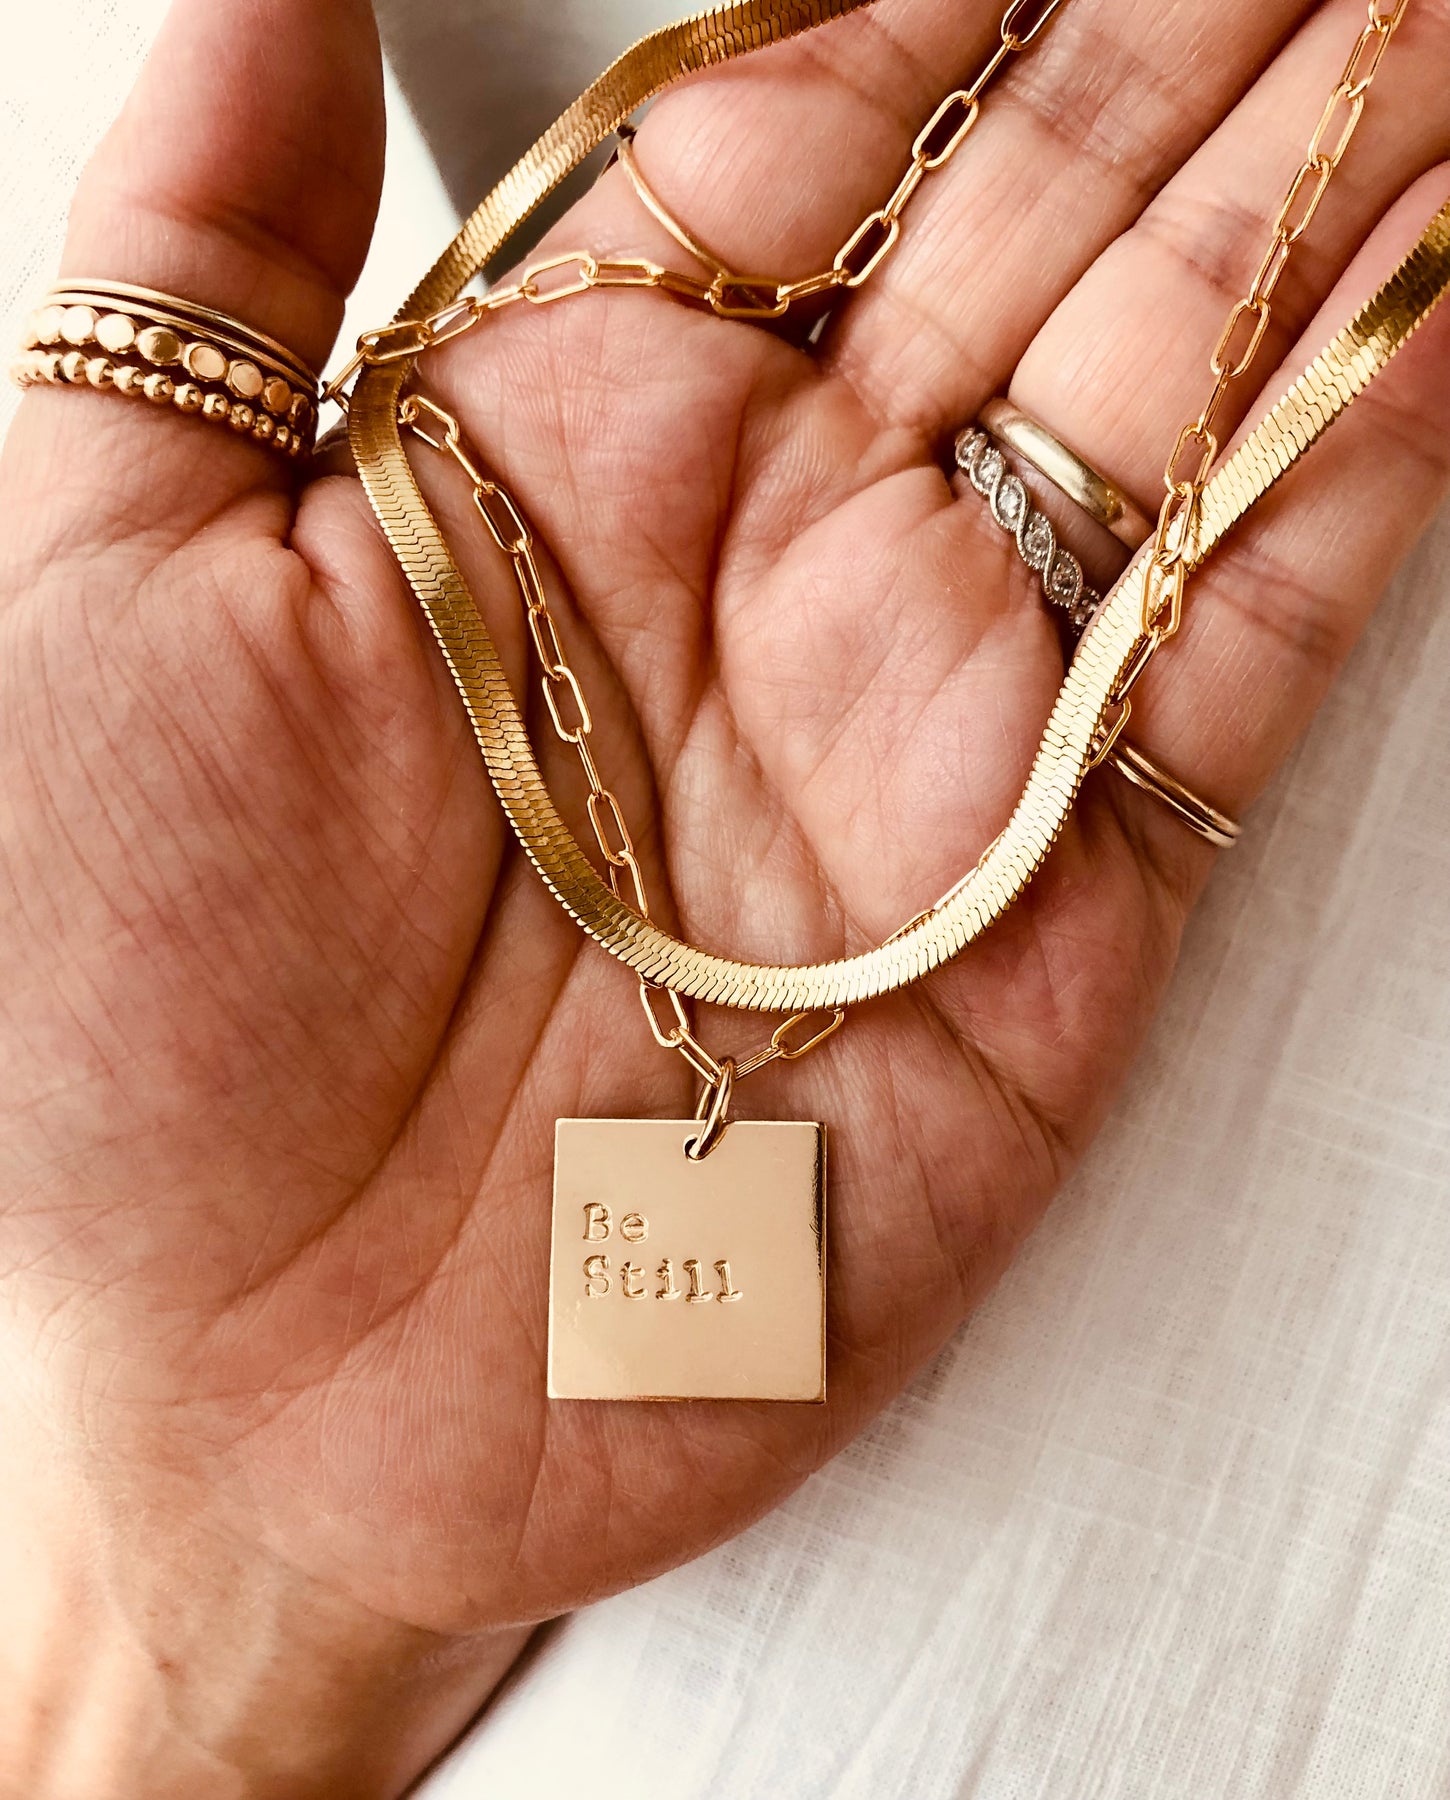 10 Meaningful Jewelry Birthday Gifts For Her – JustDesi